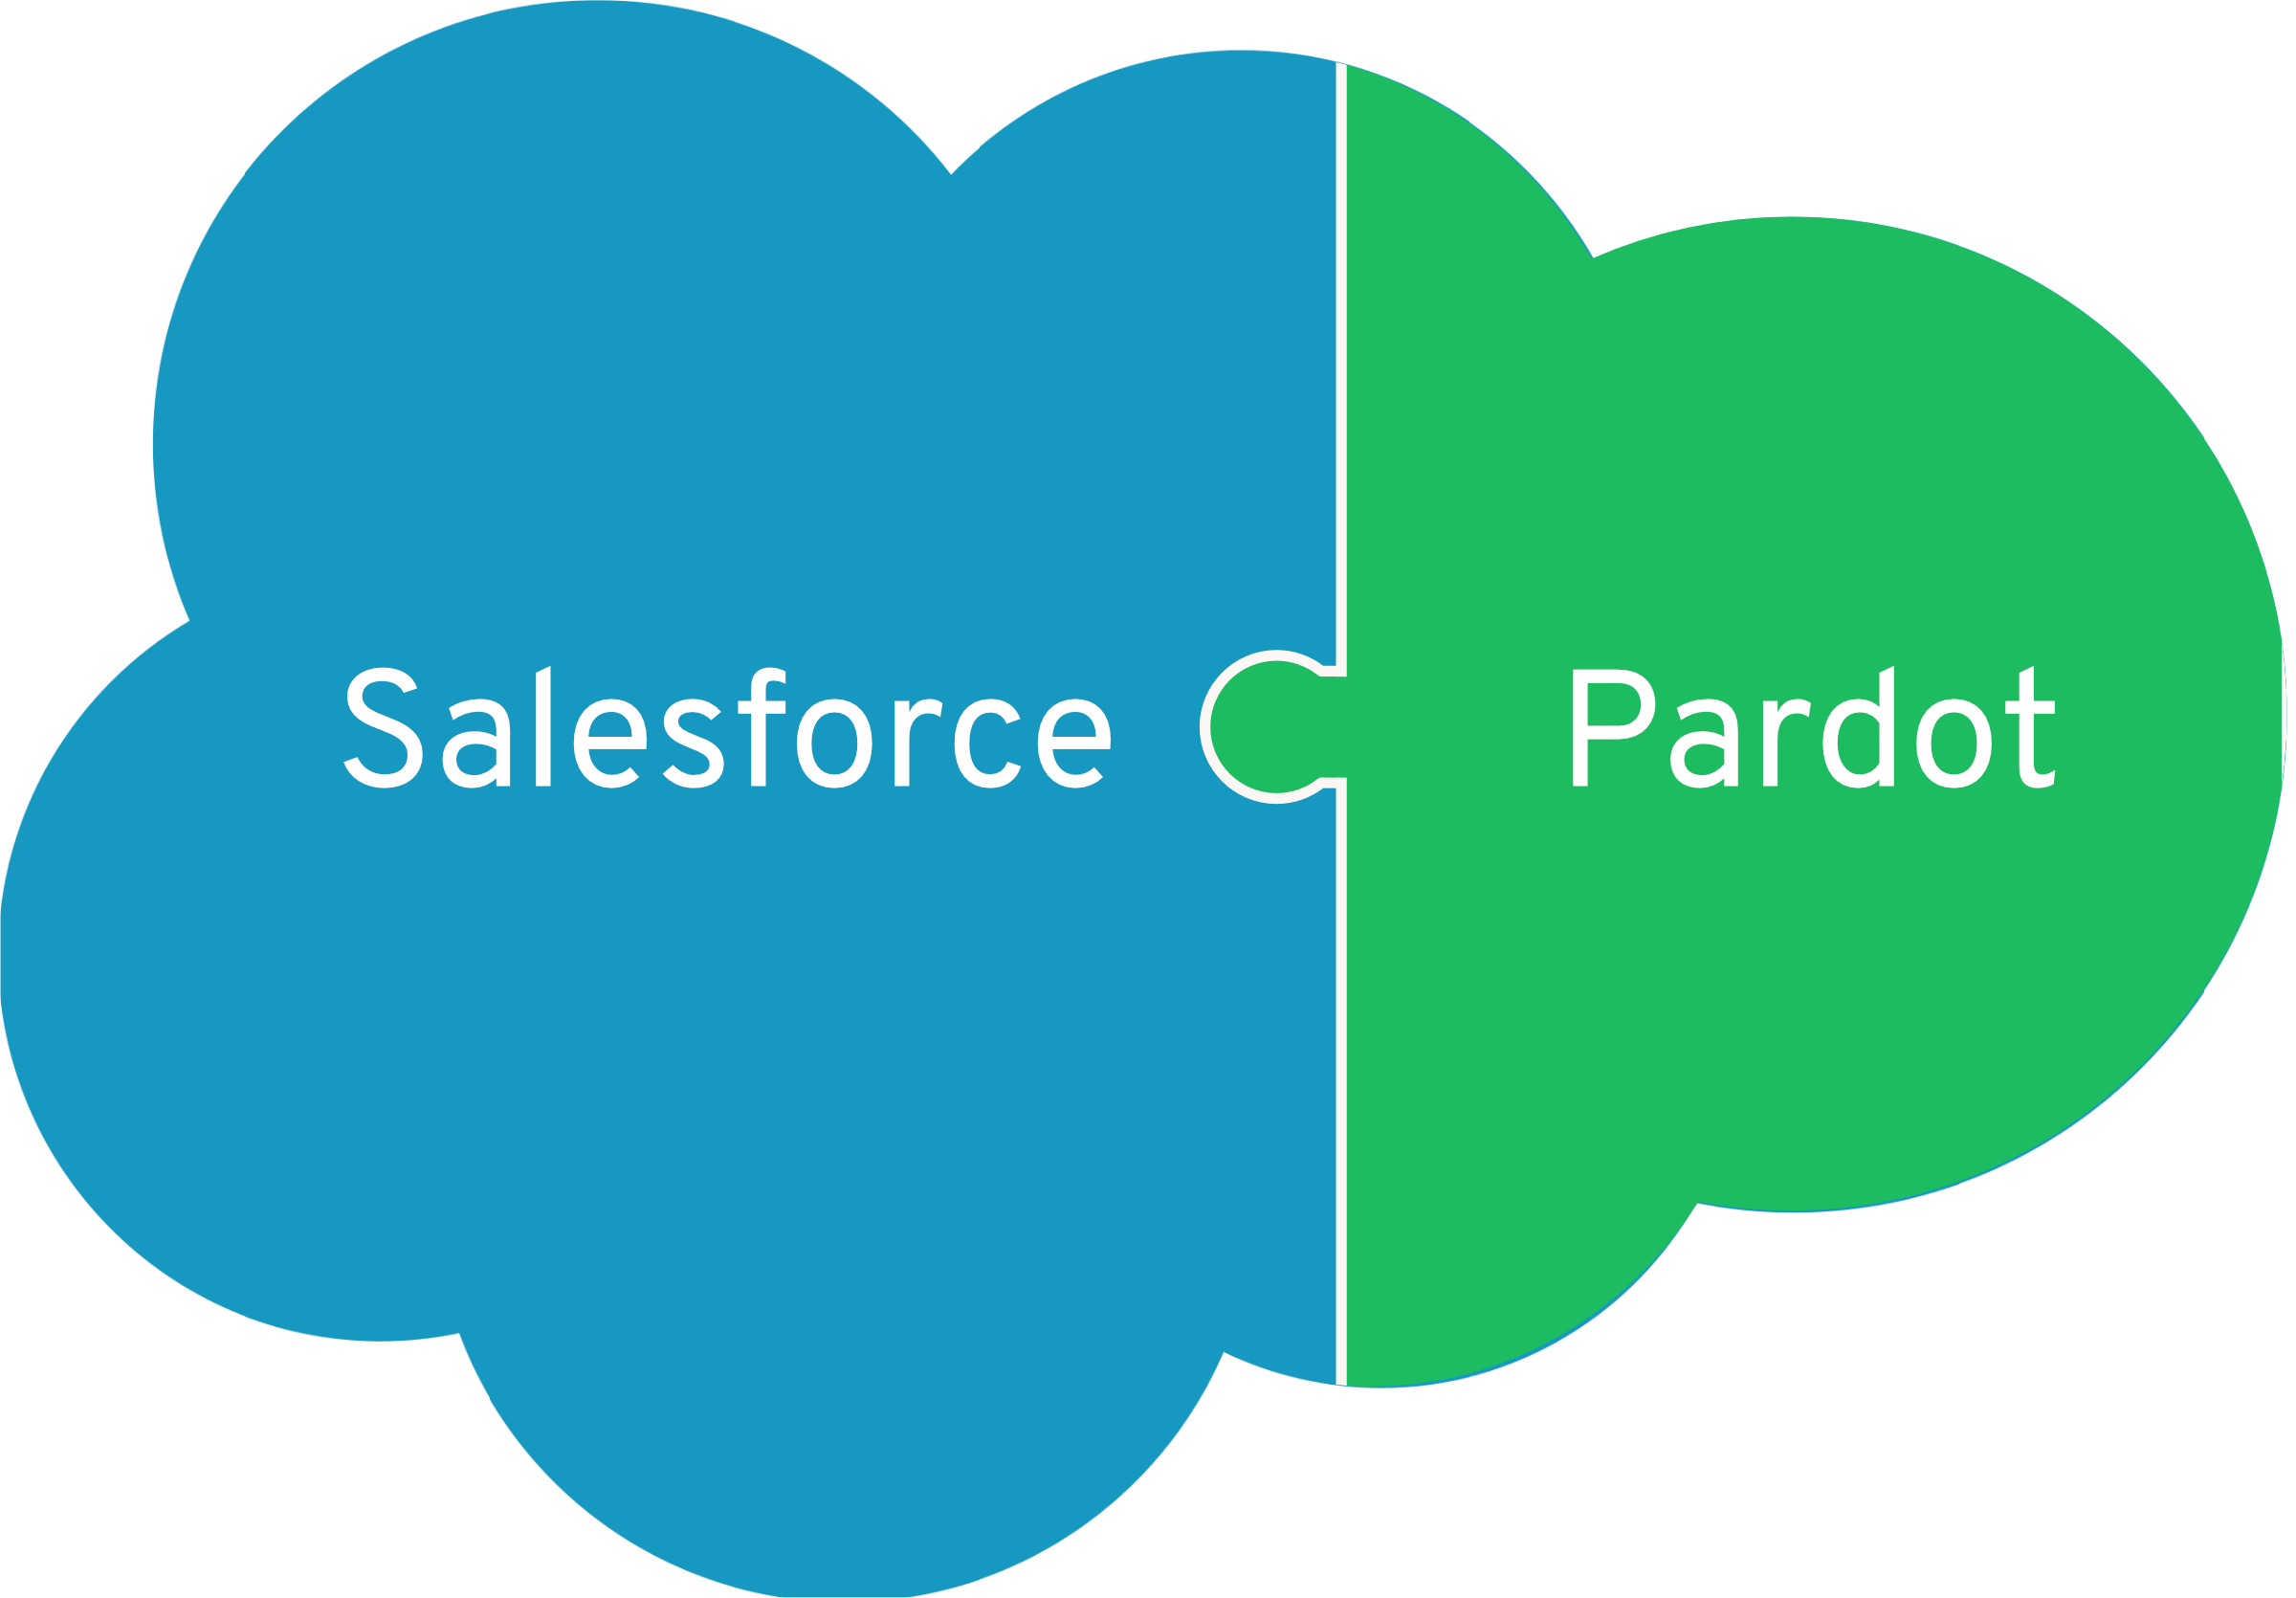 Salesforce and Pardot go hand in hand: The interaction with Salesforce makes it possible to fully exploit the functions of Pardot.